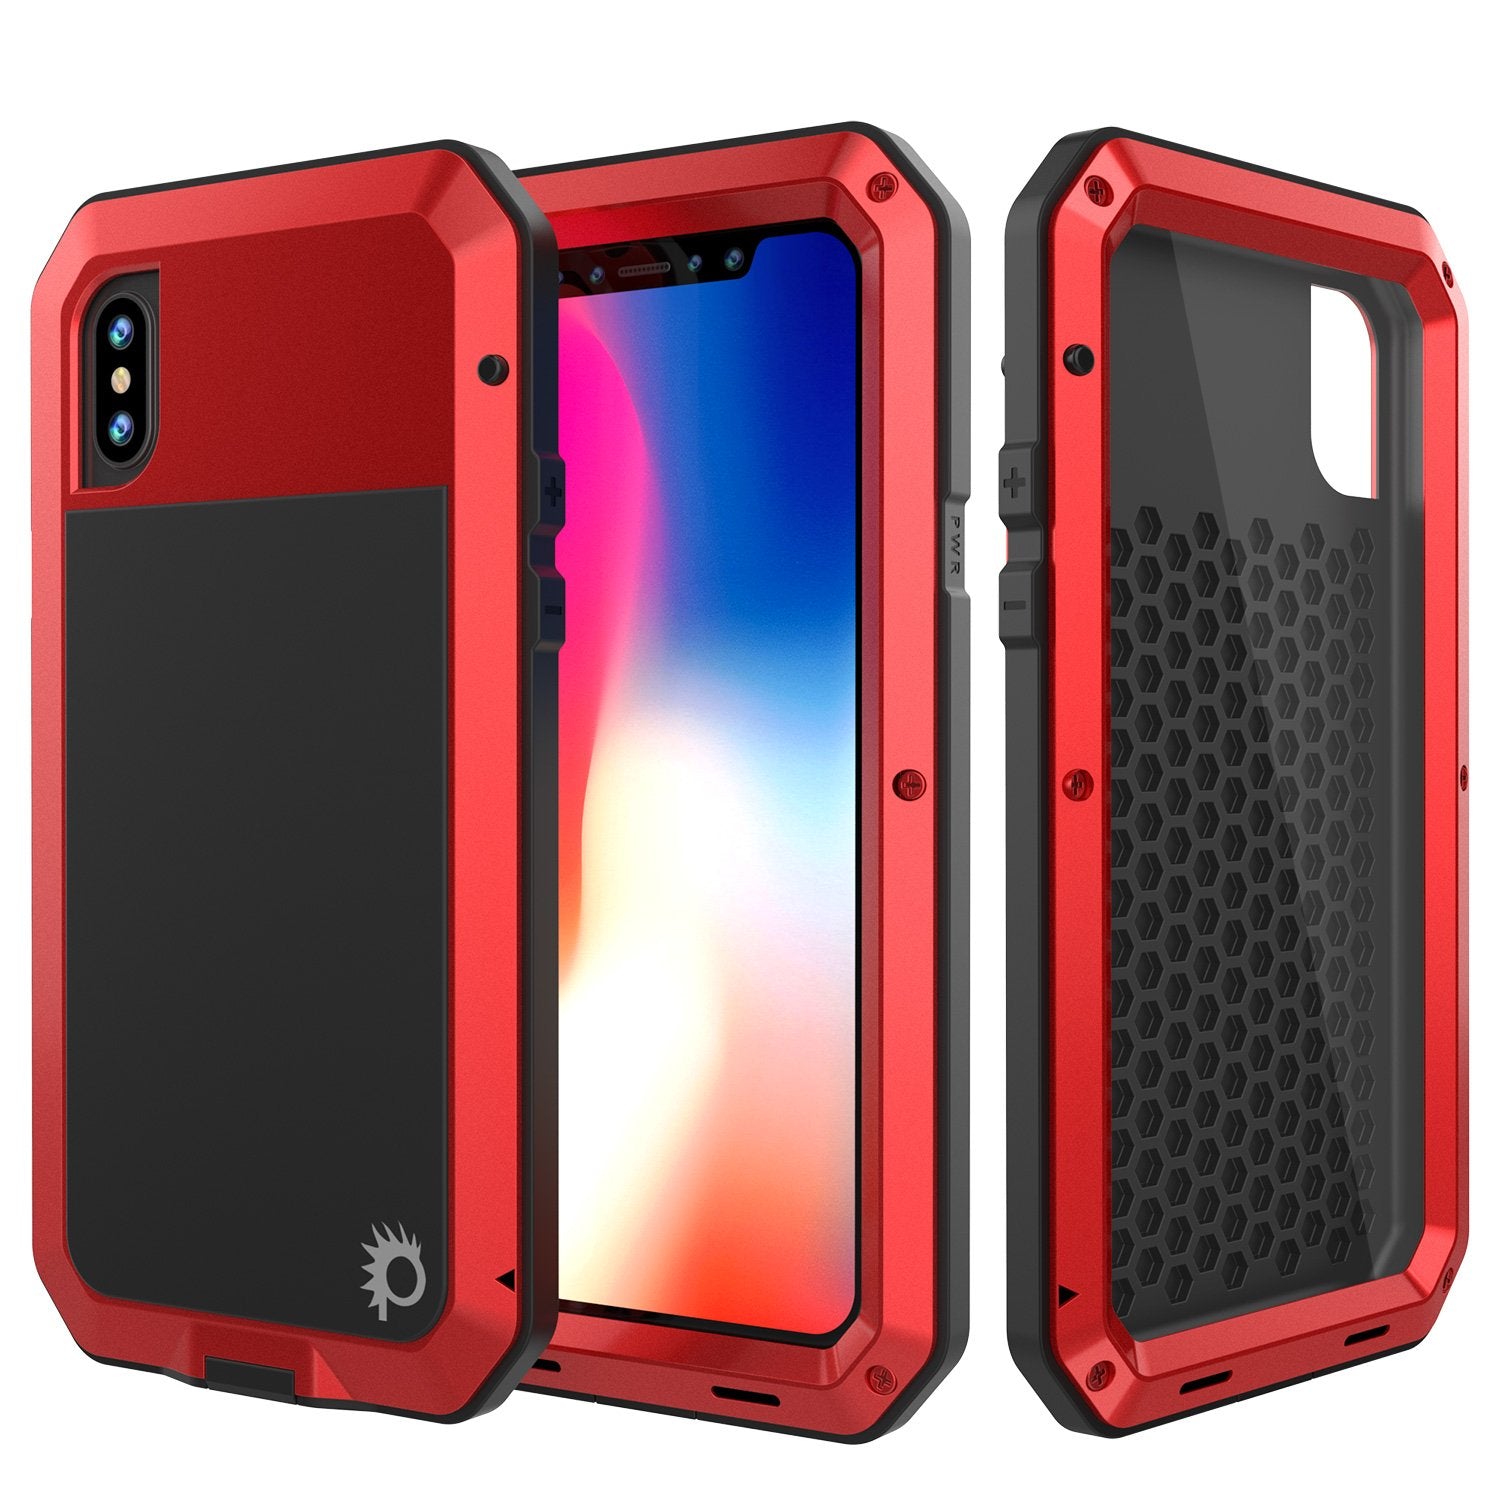 iPhone X Metal Case, Heavy Duty Military Grade Rugged Armor Cover [shock proof] Hybrid Full Body Hard Aluminum & TPU Design [non slip] W/ Prime Drop Protection for Apple iPhone 10 [Red]